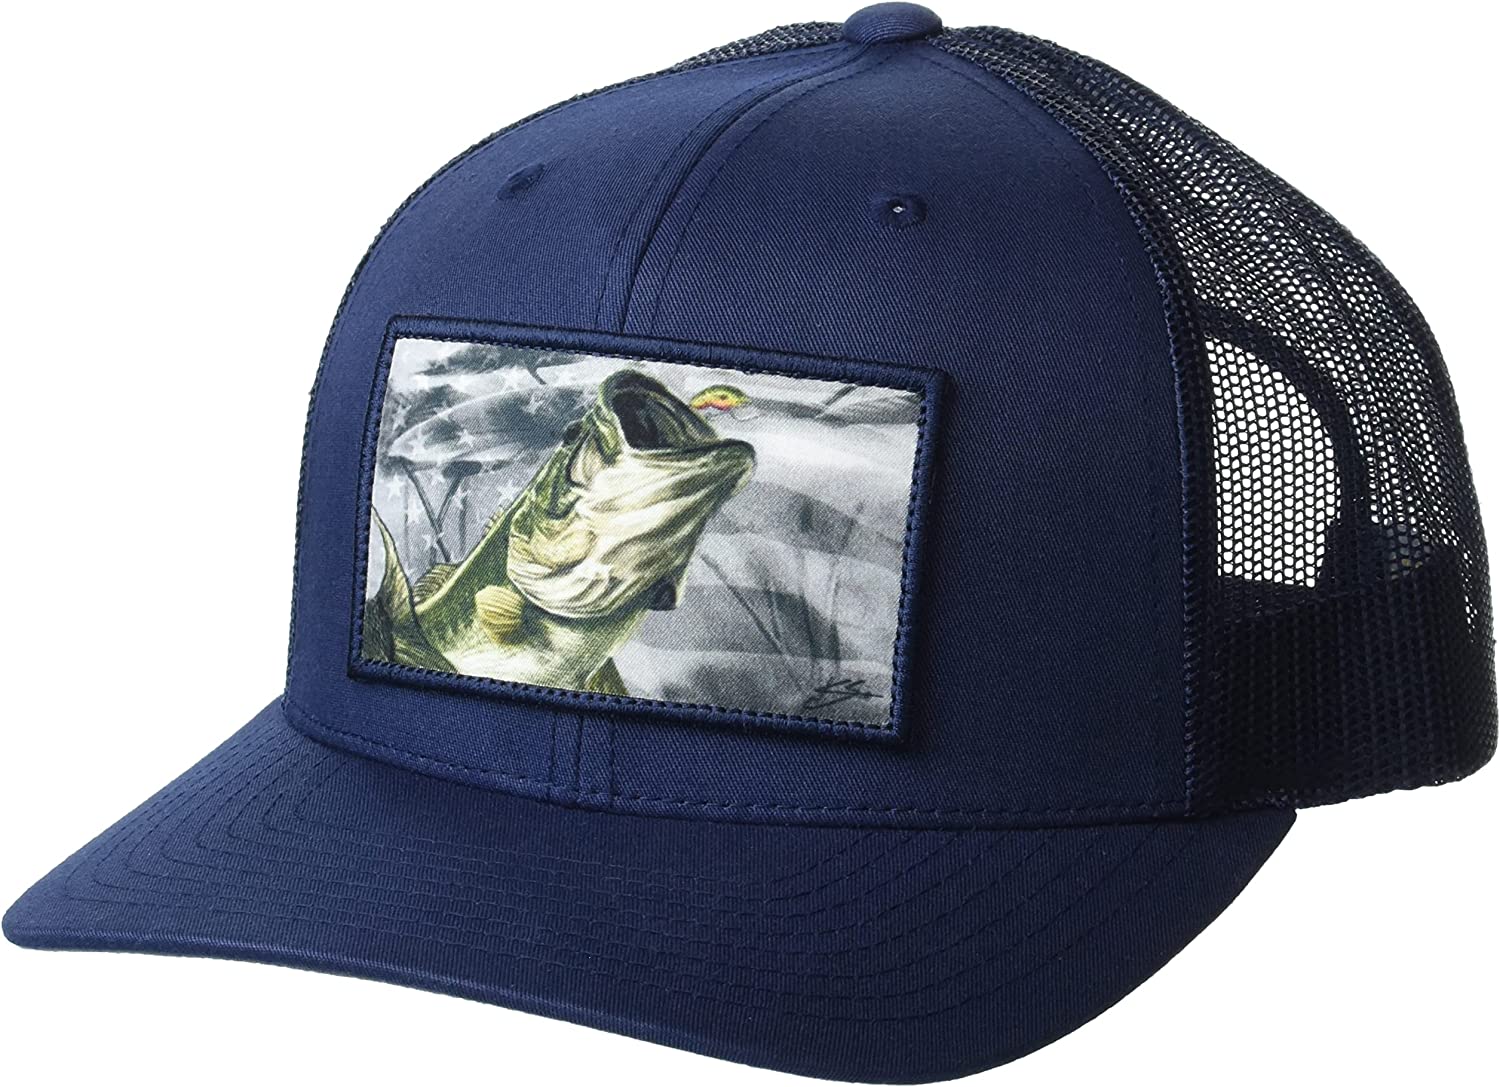  HUK Trucker, Anti-Glare Snapback Fishing Hat for Men, Patch  Light-Sargasso Sea, One Size : Sports & Outdoors